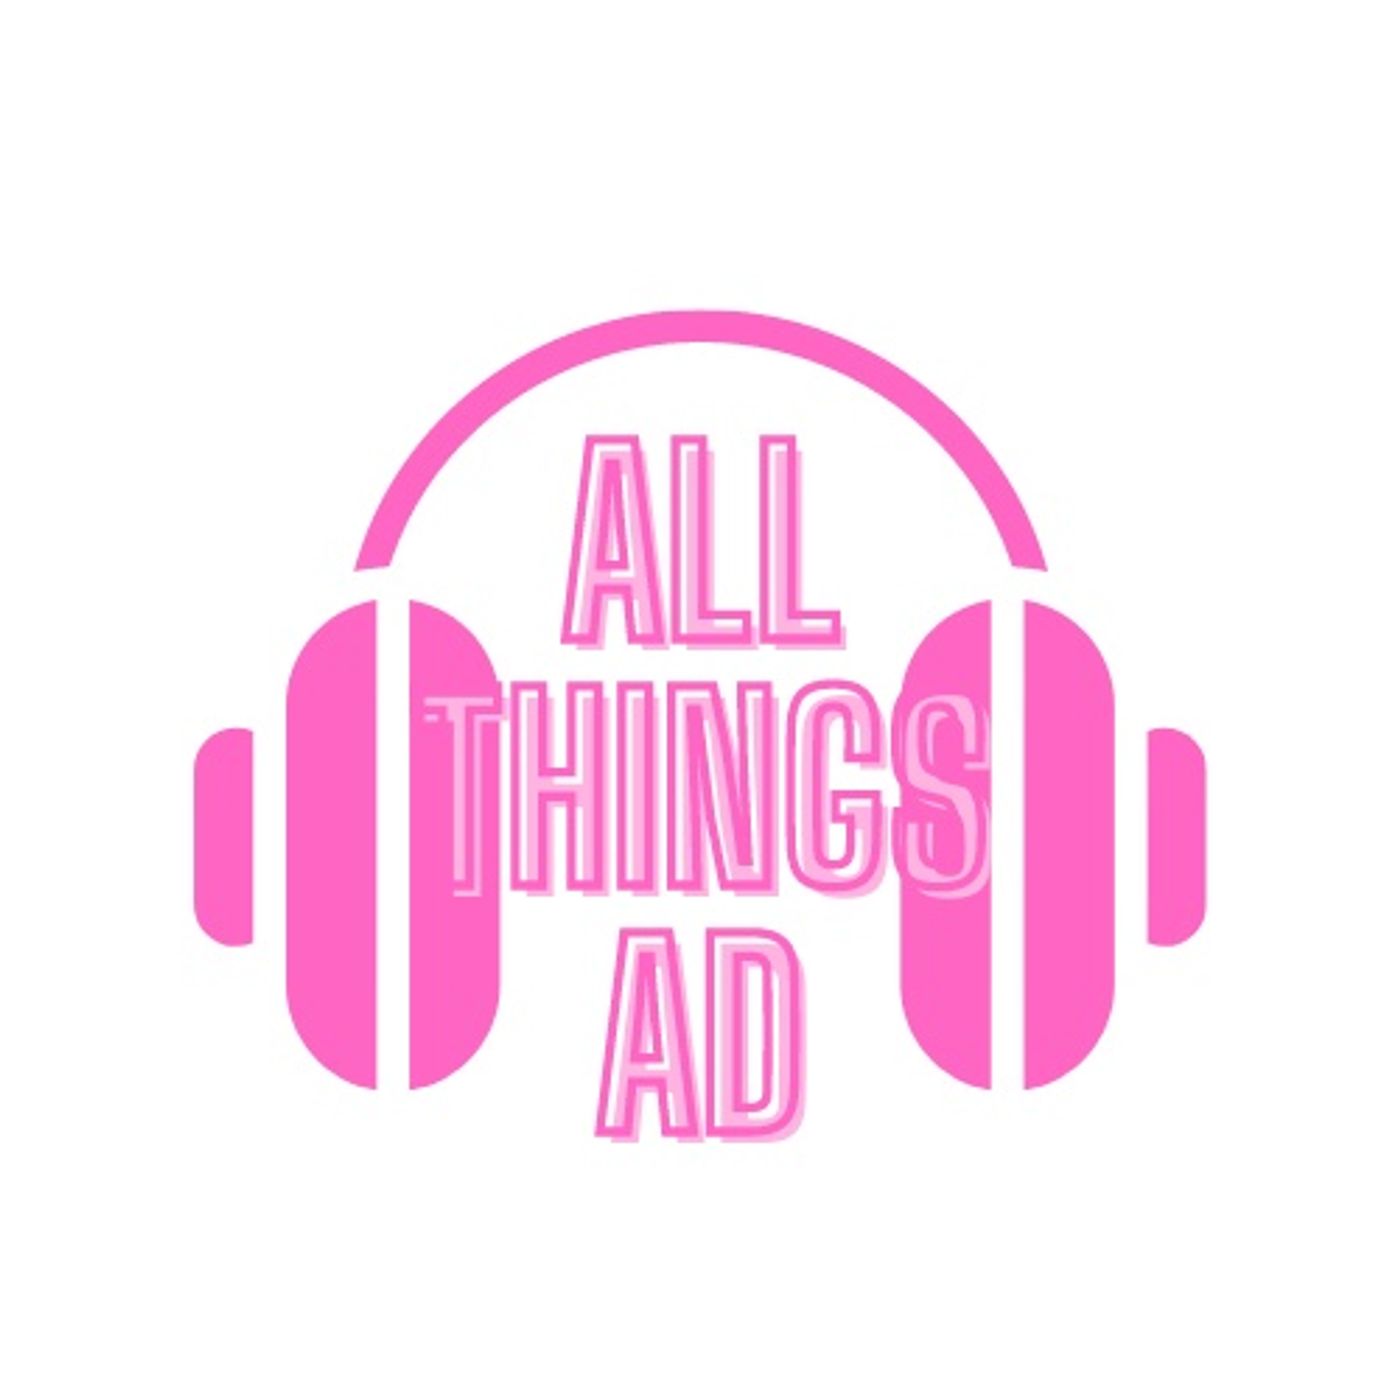 All Things AD